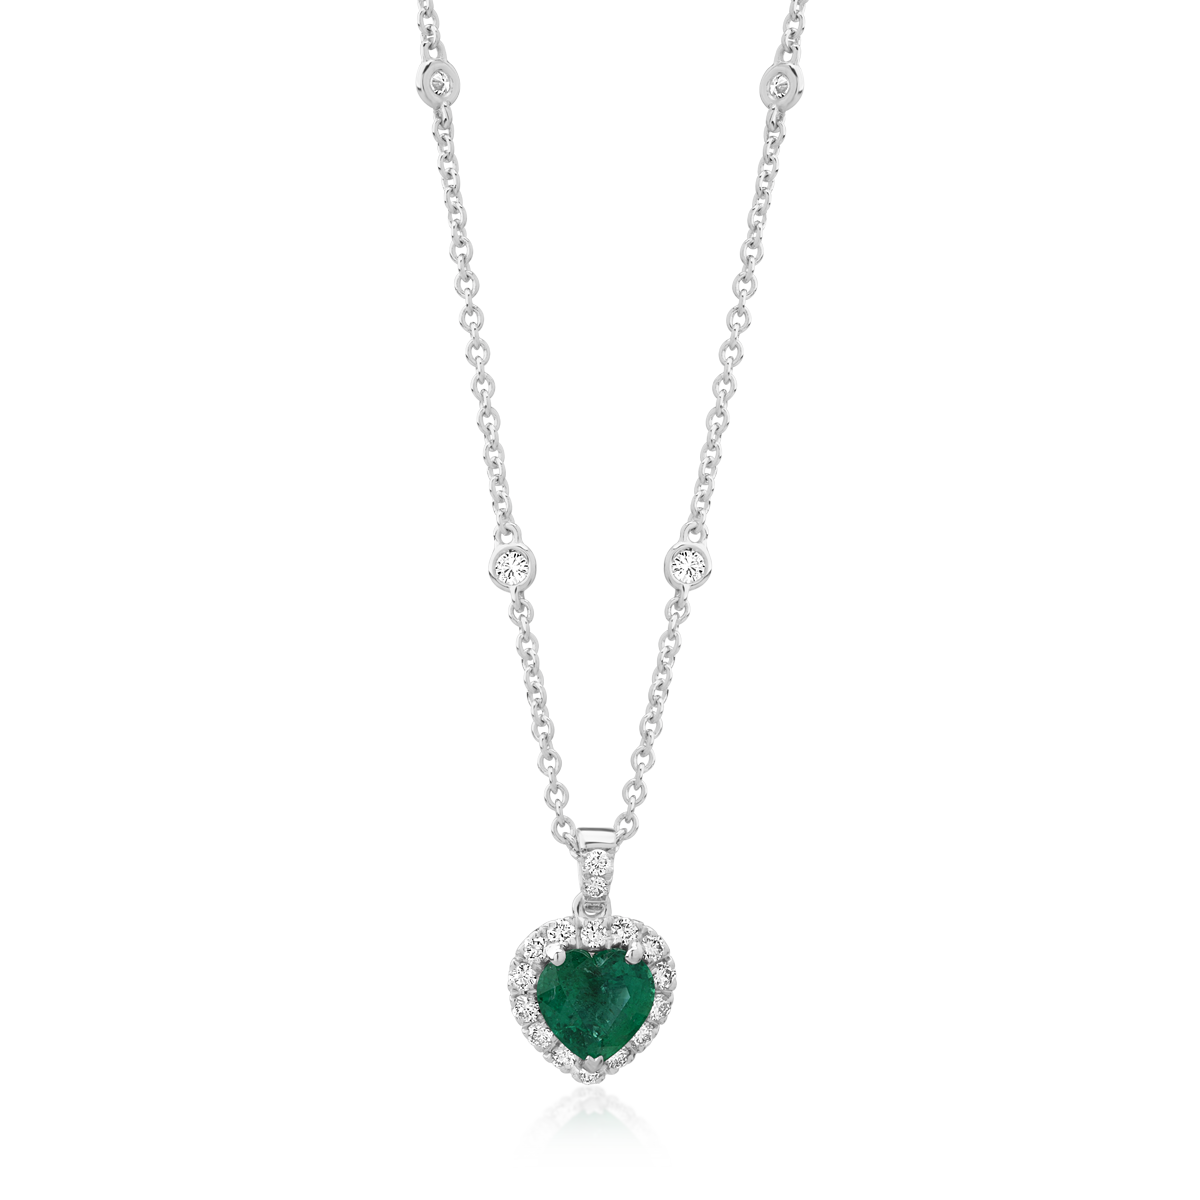 18K white gold pendant necklace with emerald 0.75ct and 0.49ct diamonds